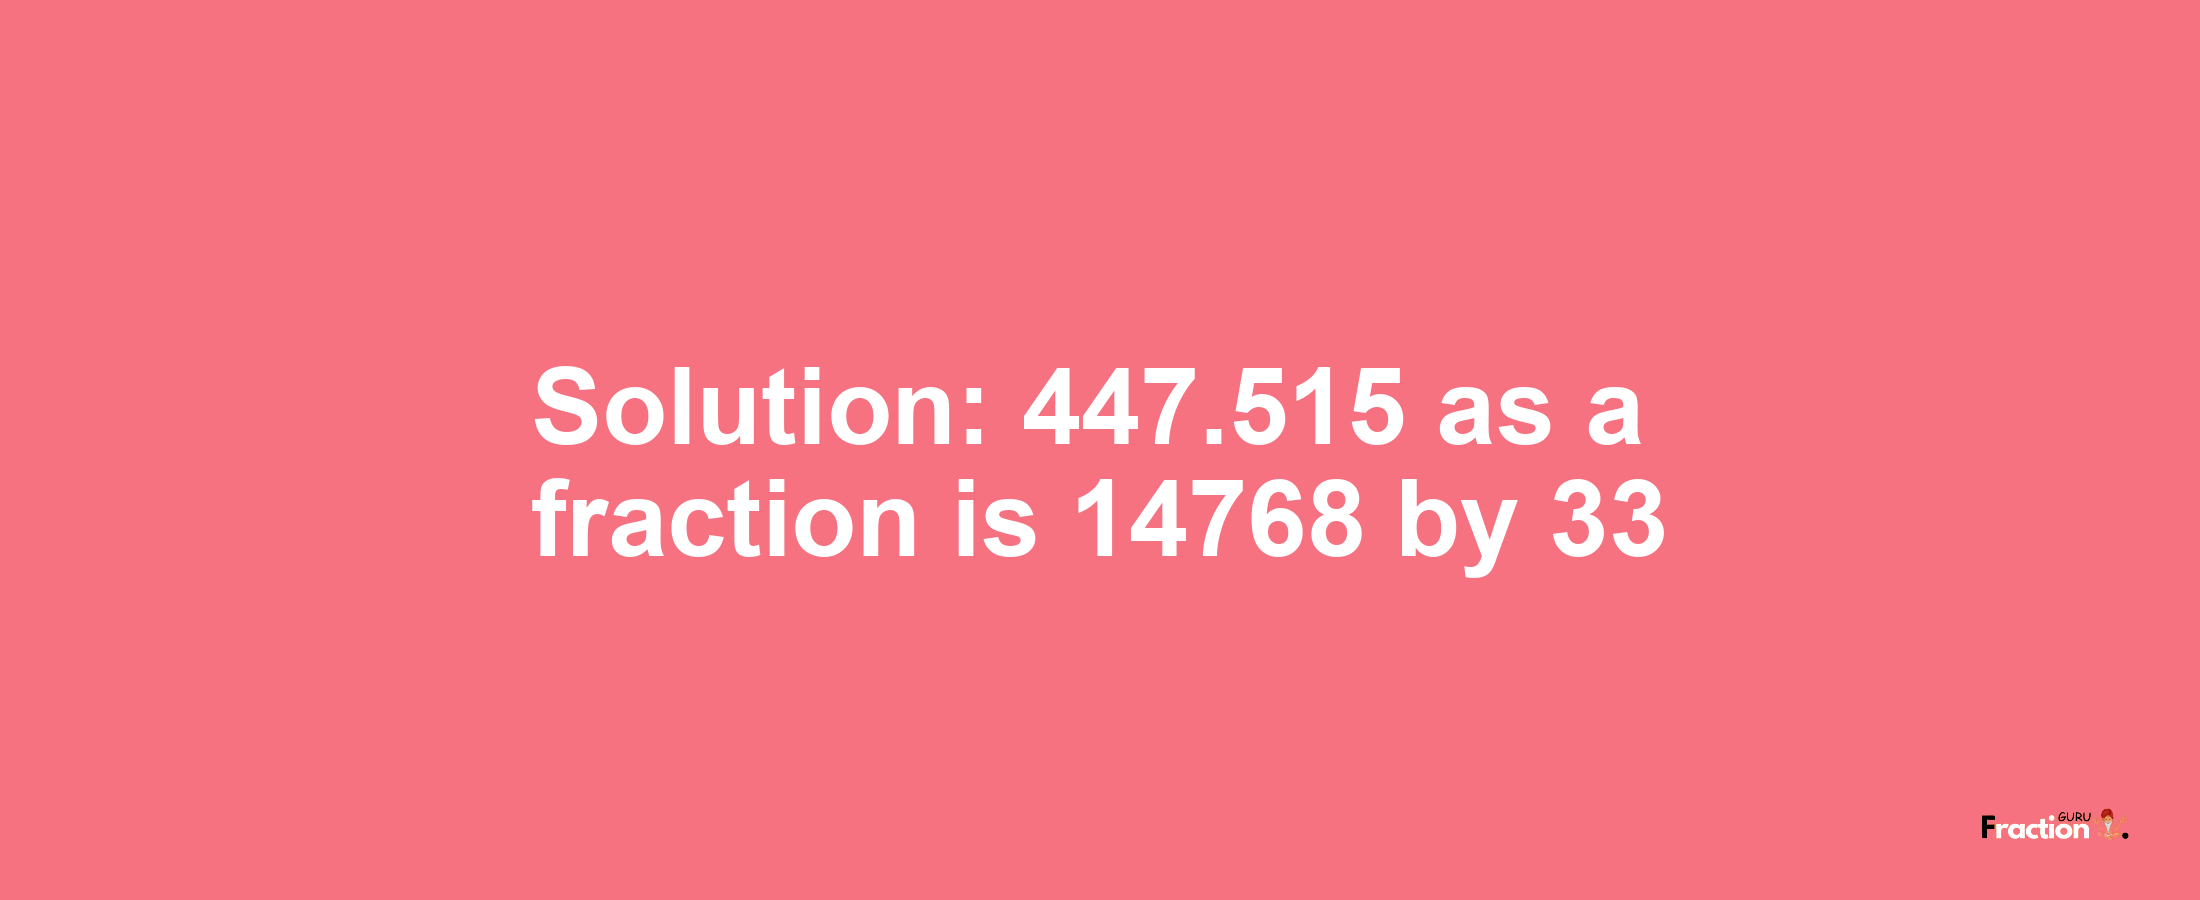 Solution:447.515 as a fraction is 14768/33